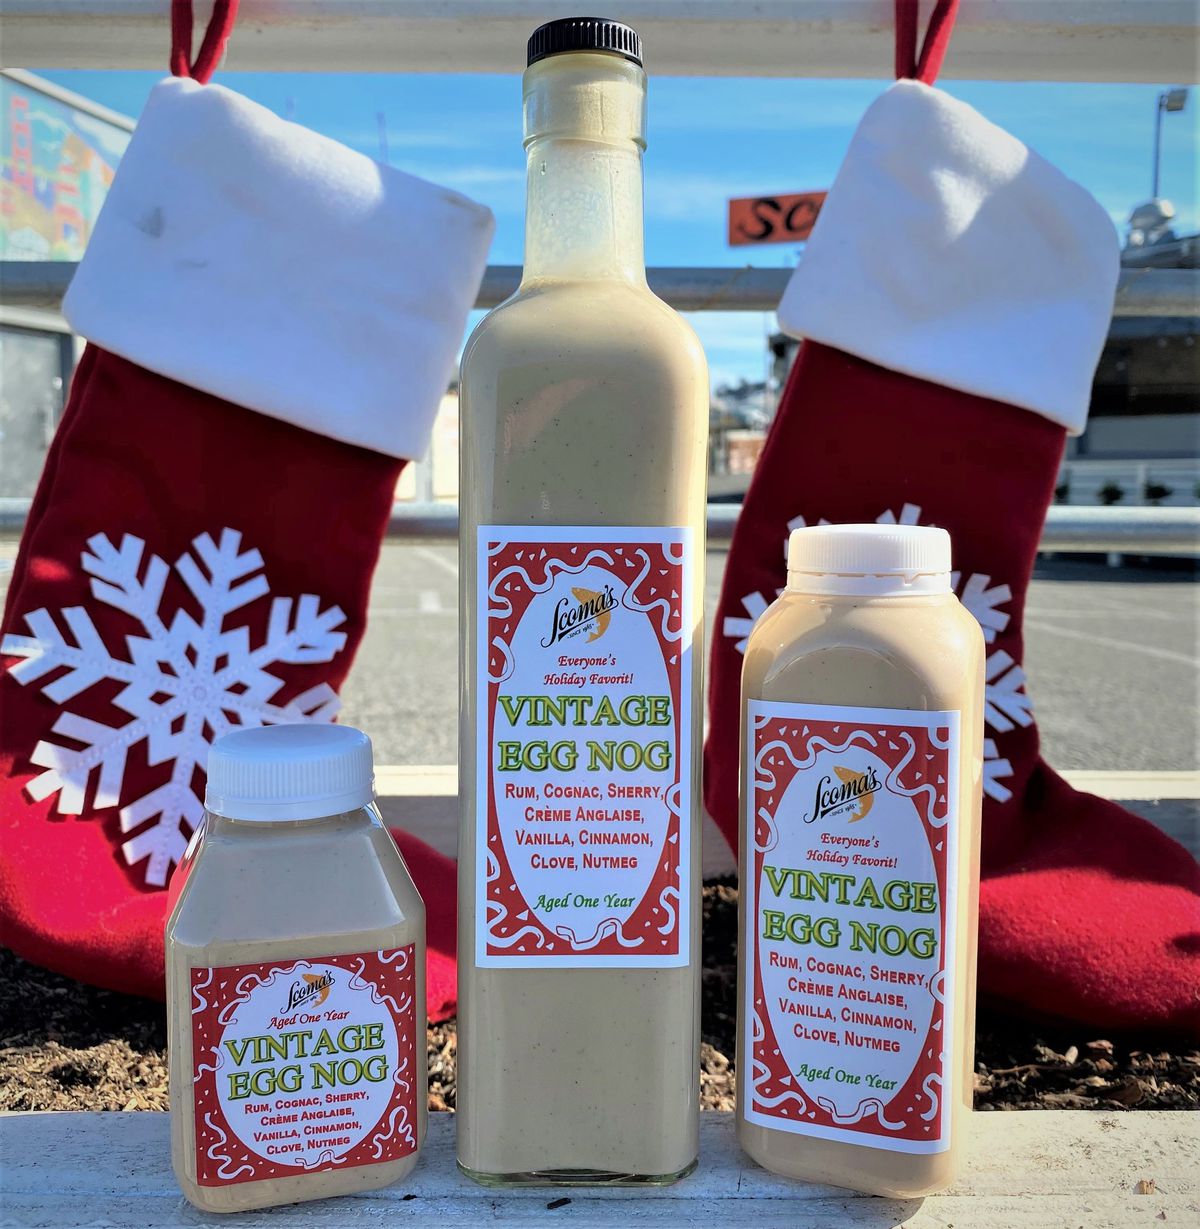 Egg nog from Scoma’s